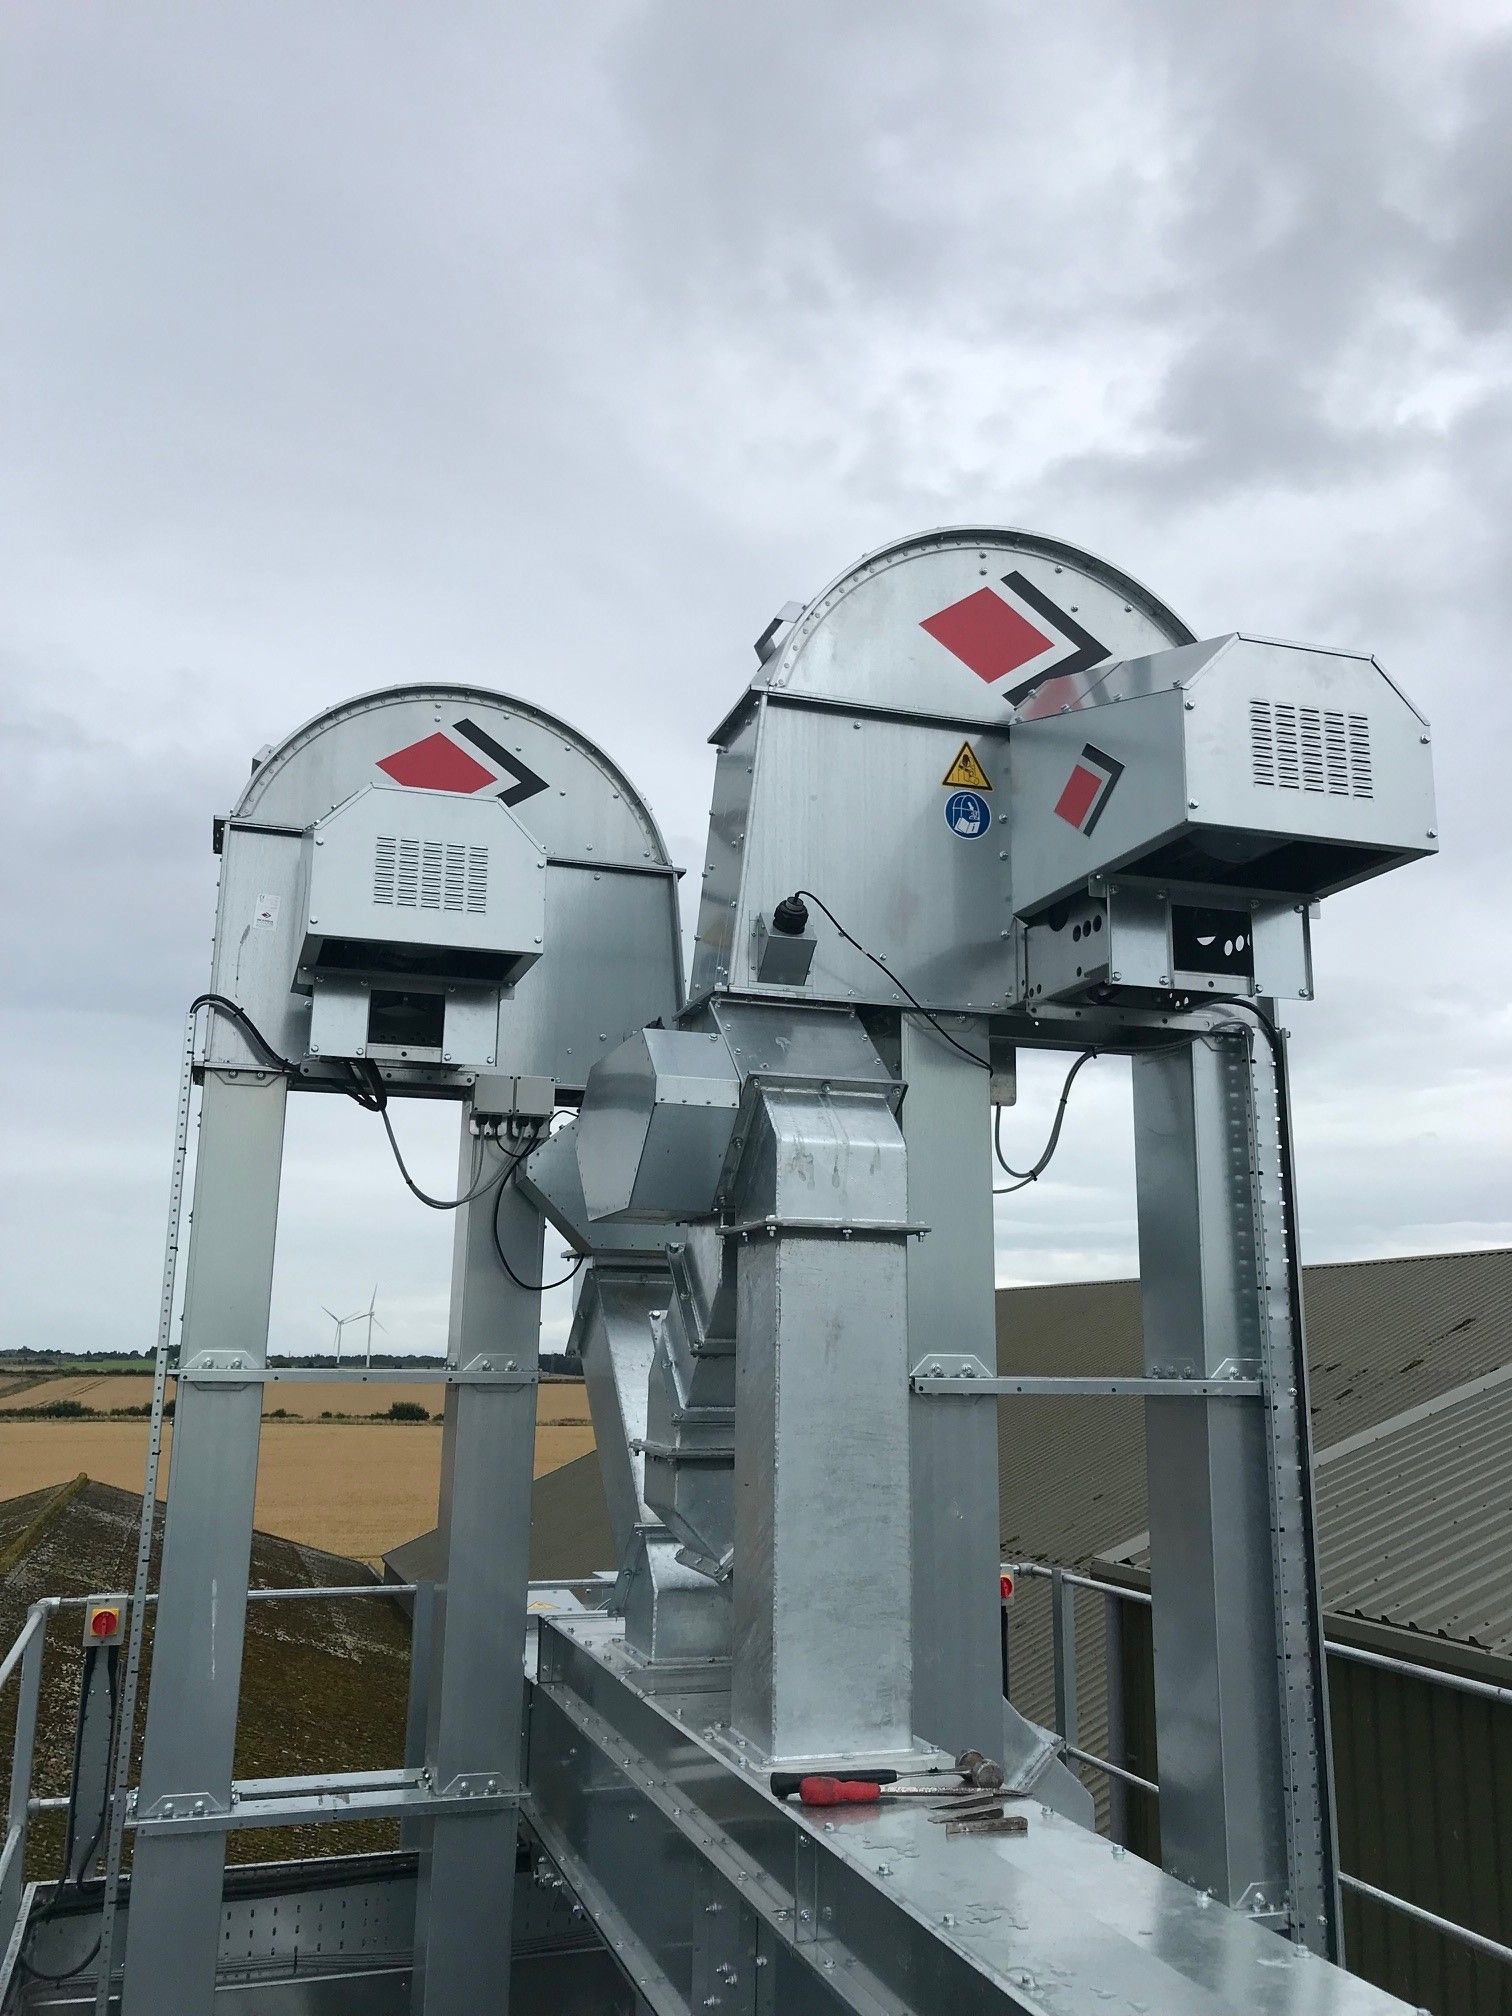 BDC Systems Ltd and partner Edwards Engineering deliver hi-tech grain drying and processing plant to increase productivity and efficiency for Balgonie Estates Ltd.